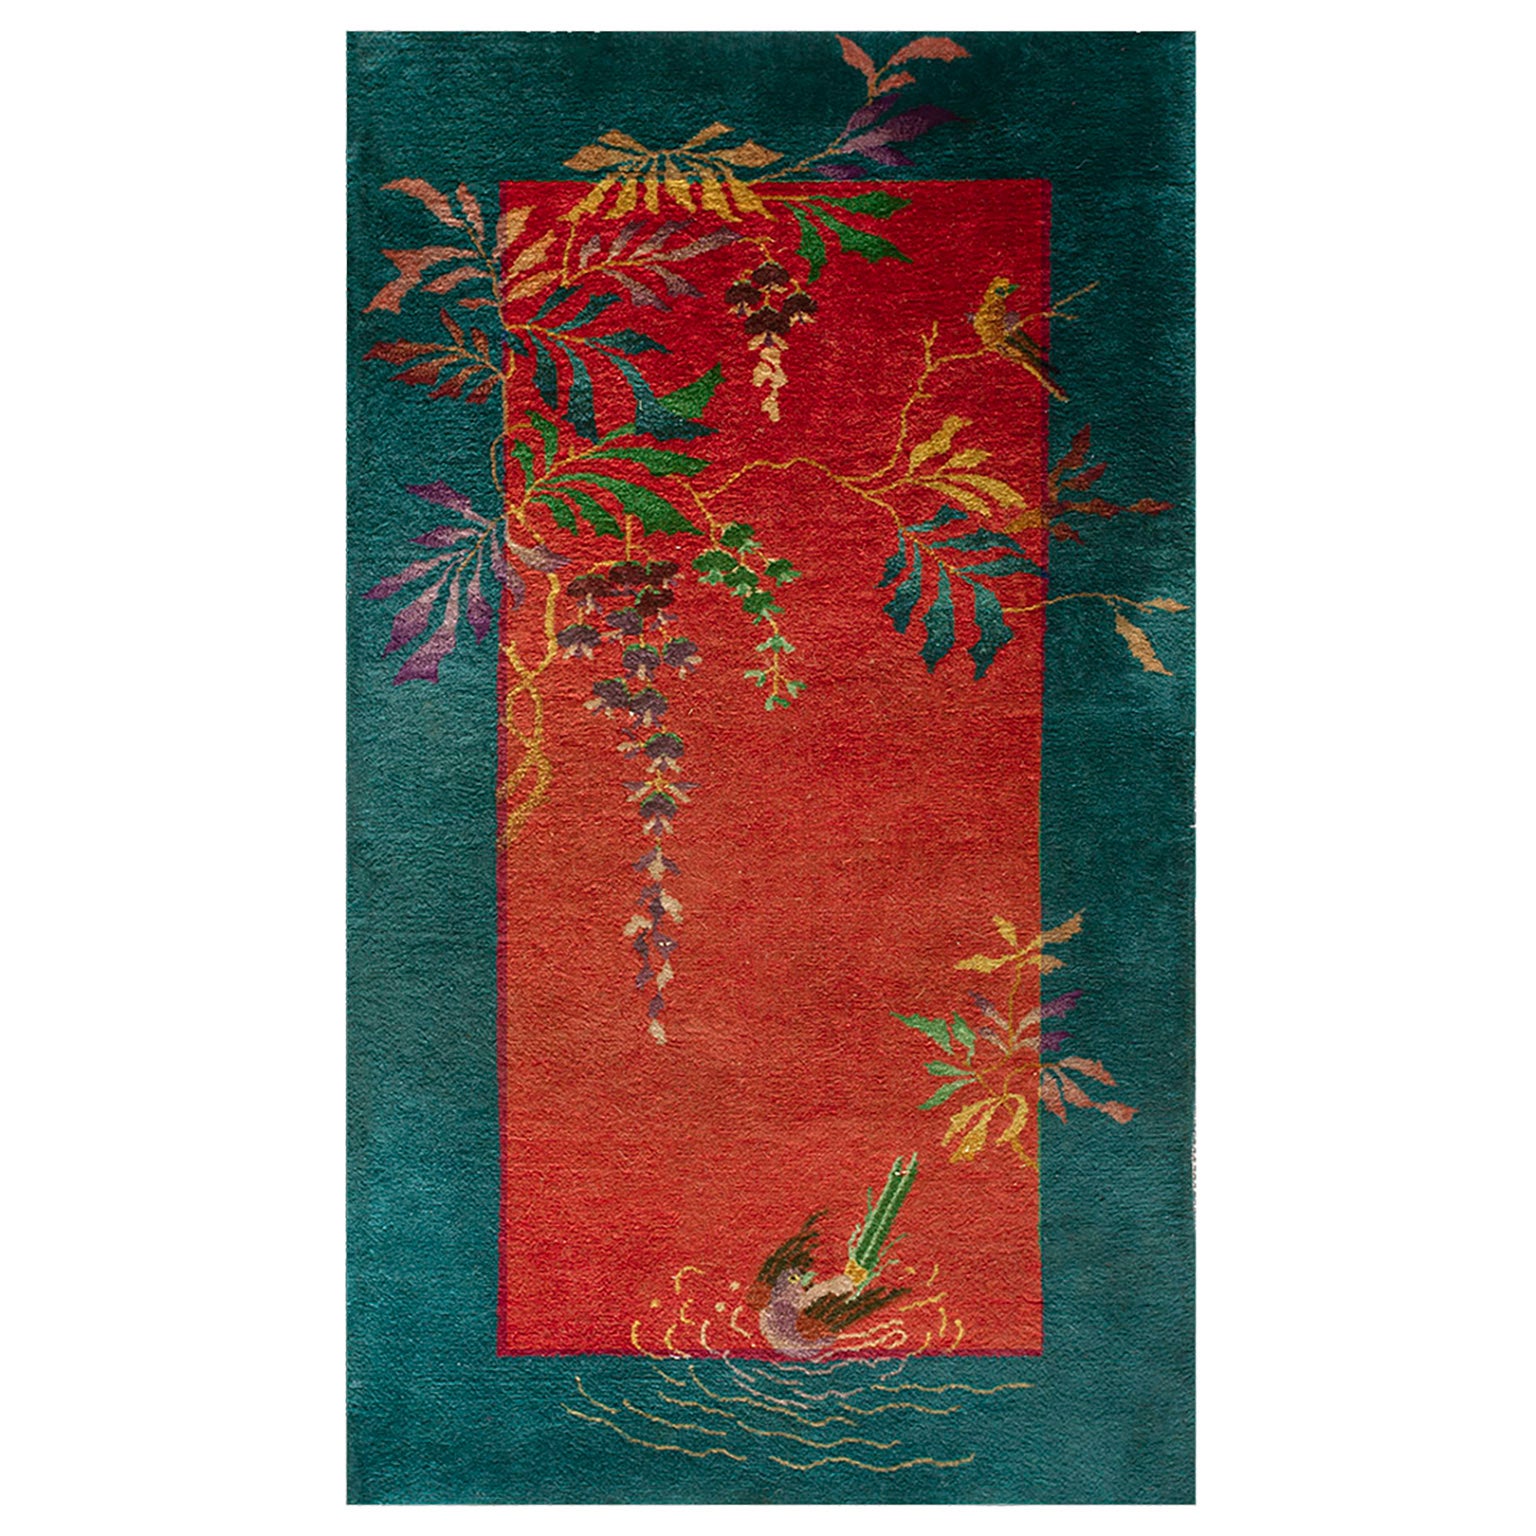 1920s Chinese Art Deco Rug ( 2'6" x 4'4" - 75 x 132 ) For Sale